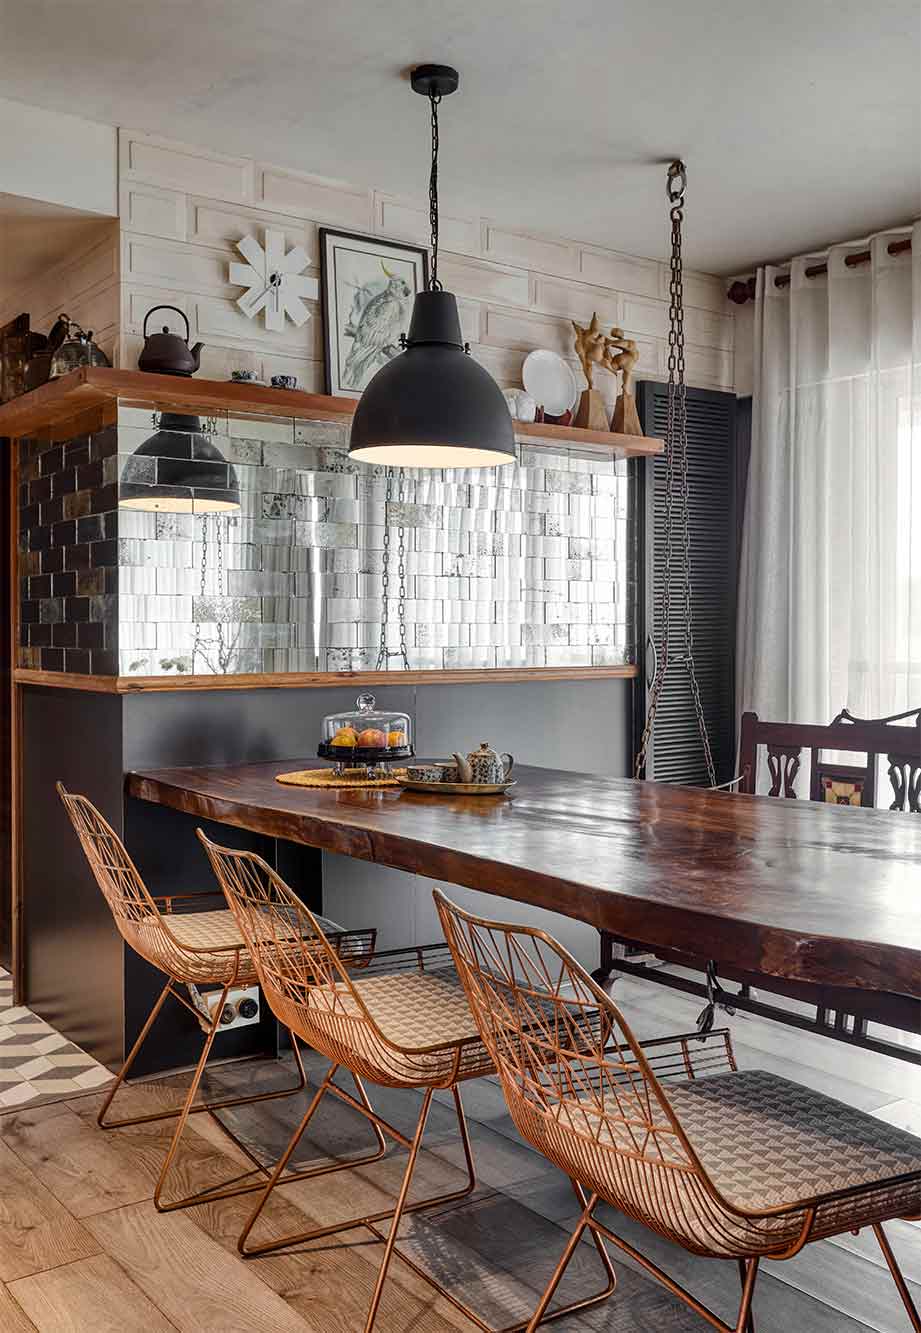 Cane Chairs With Wooden Dining Table Attached To Wall - Beautiful Homes